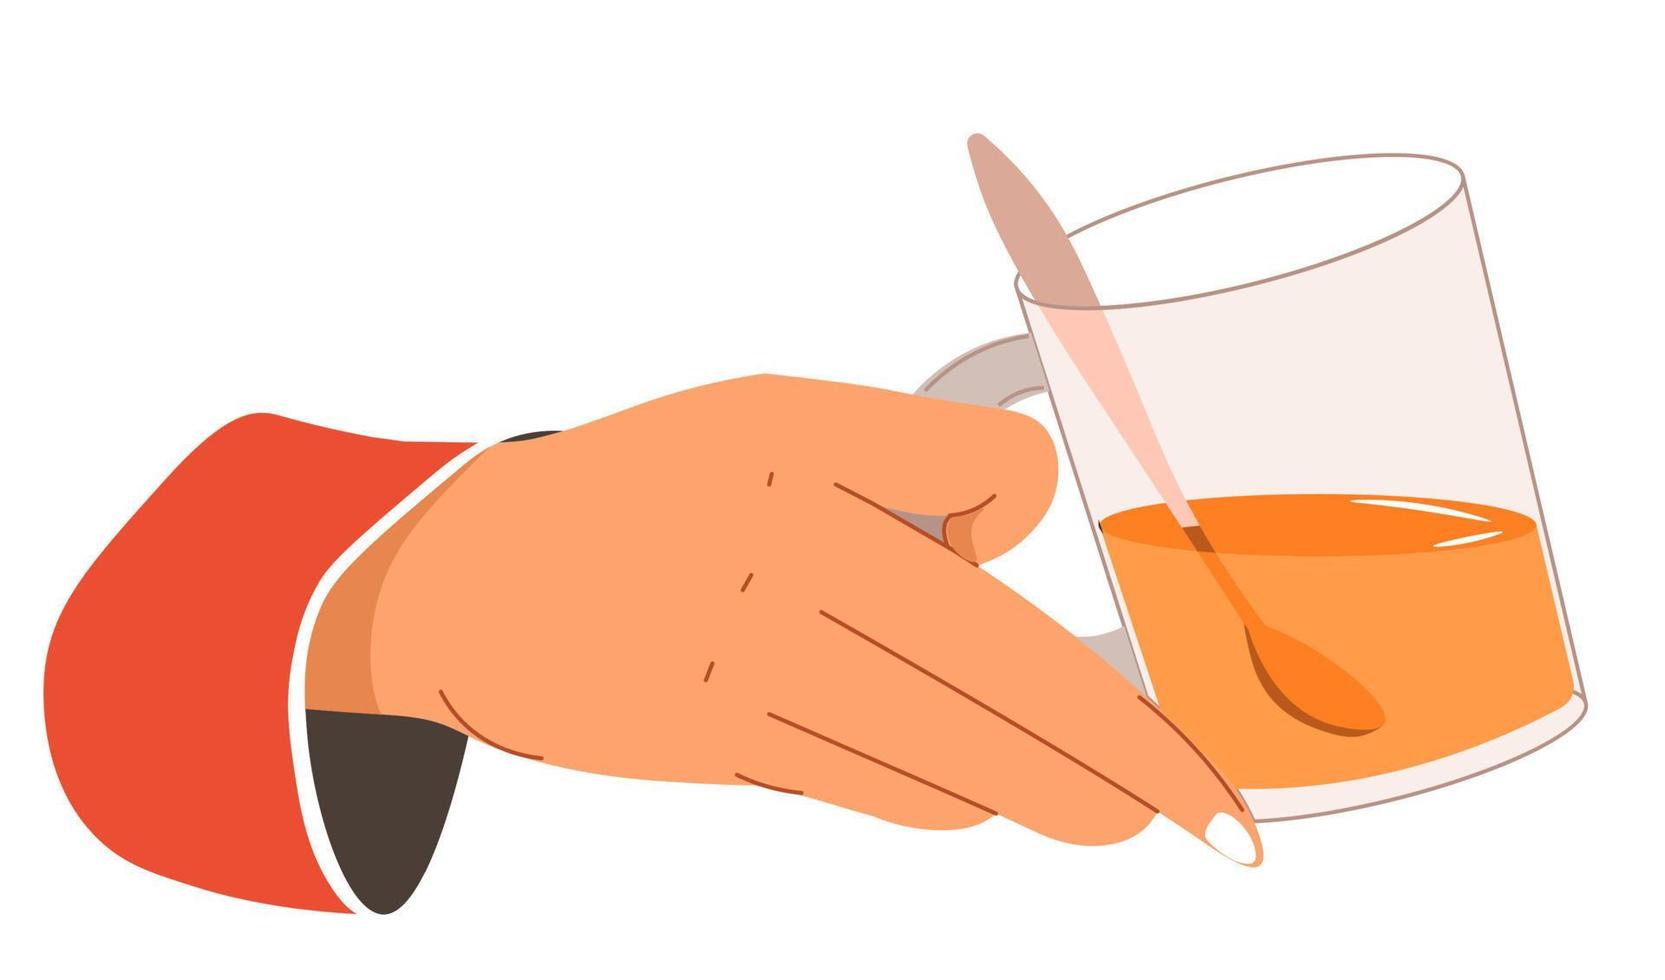 Hand holding cup of tea poured in glass mug vector